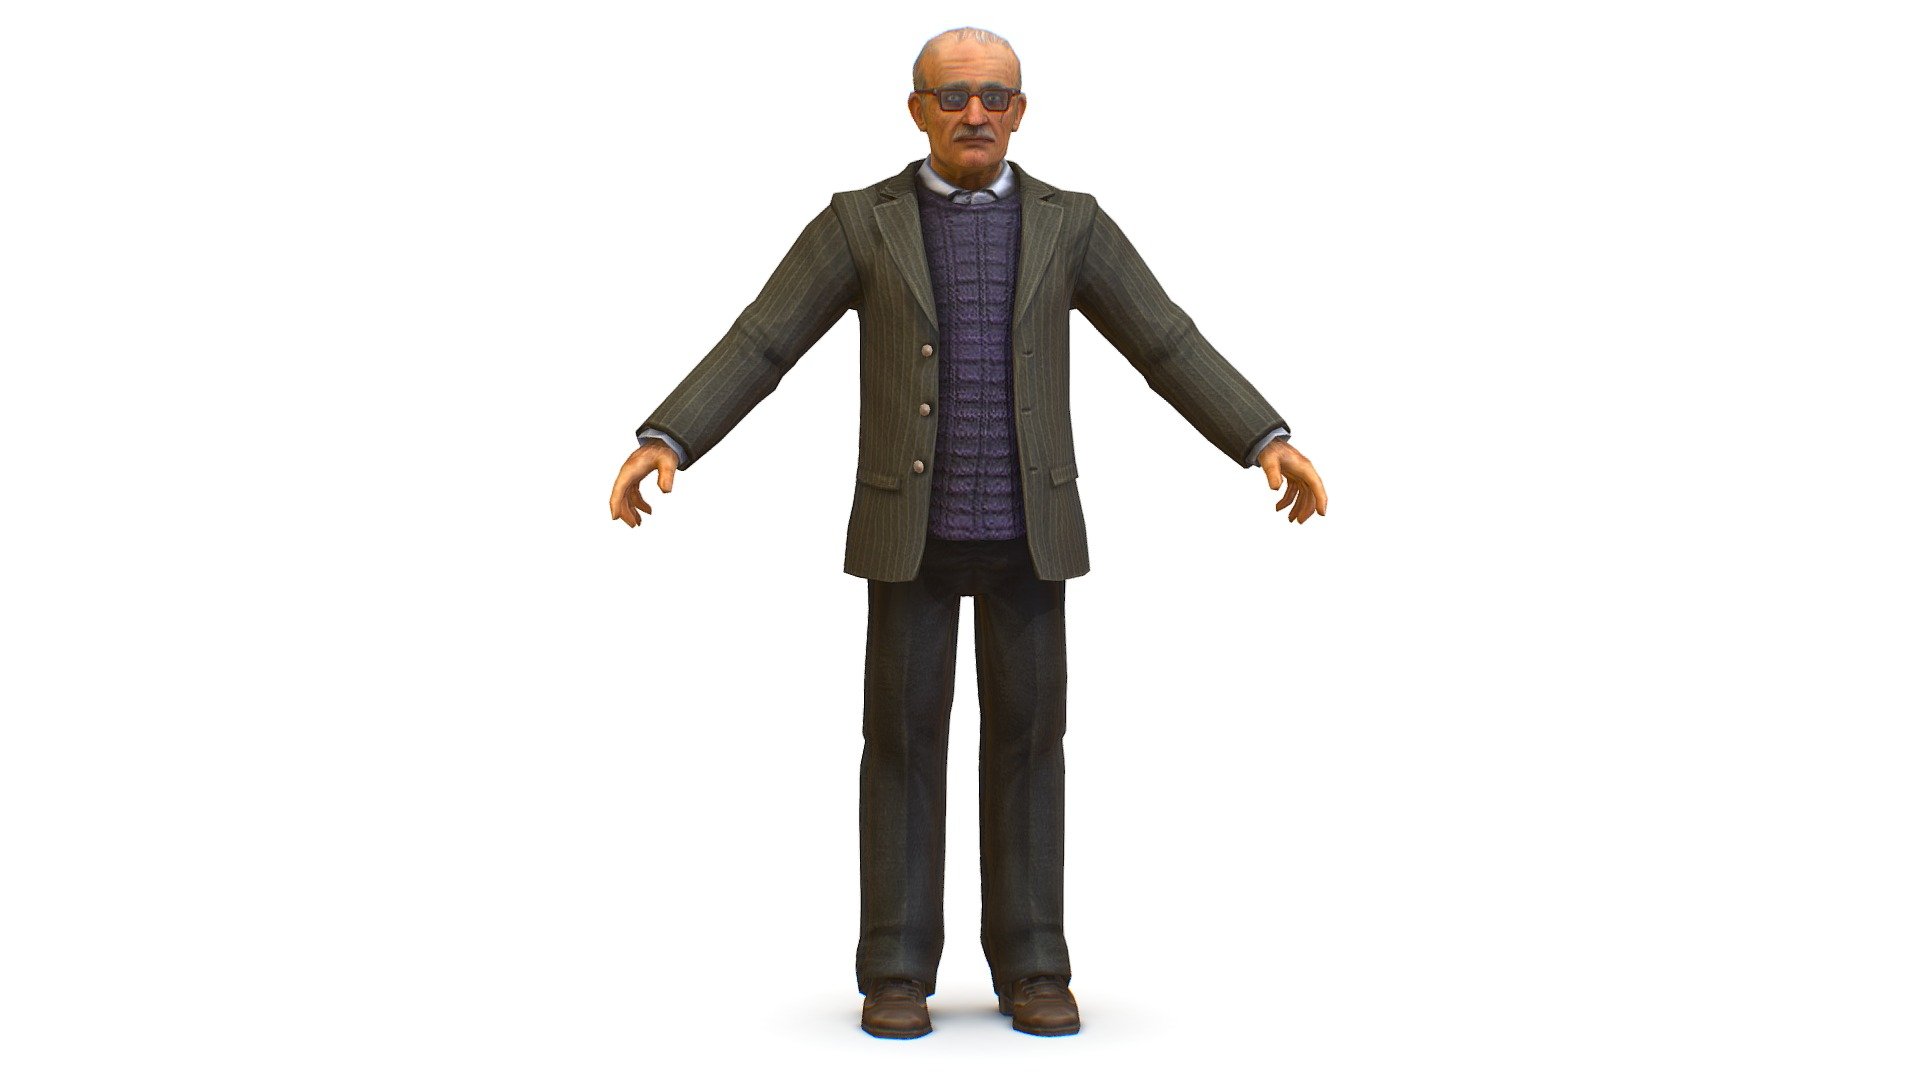 an old man professor in a sweater jacket and glasses - 3dsMax file included/ texture 512 color only, head and body 3d model